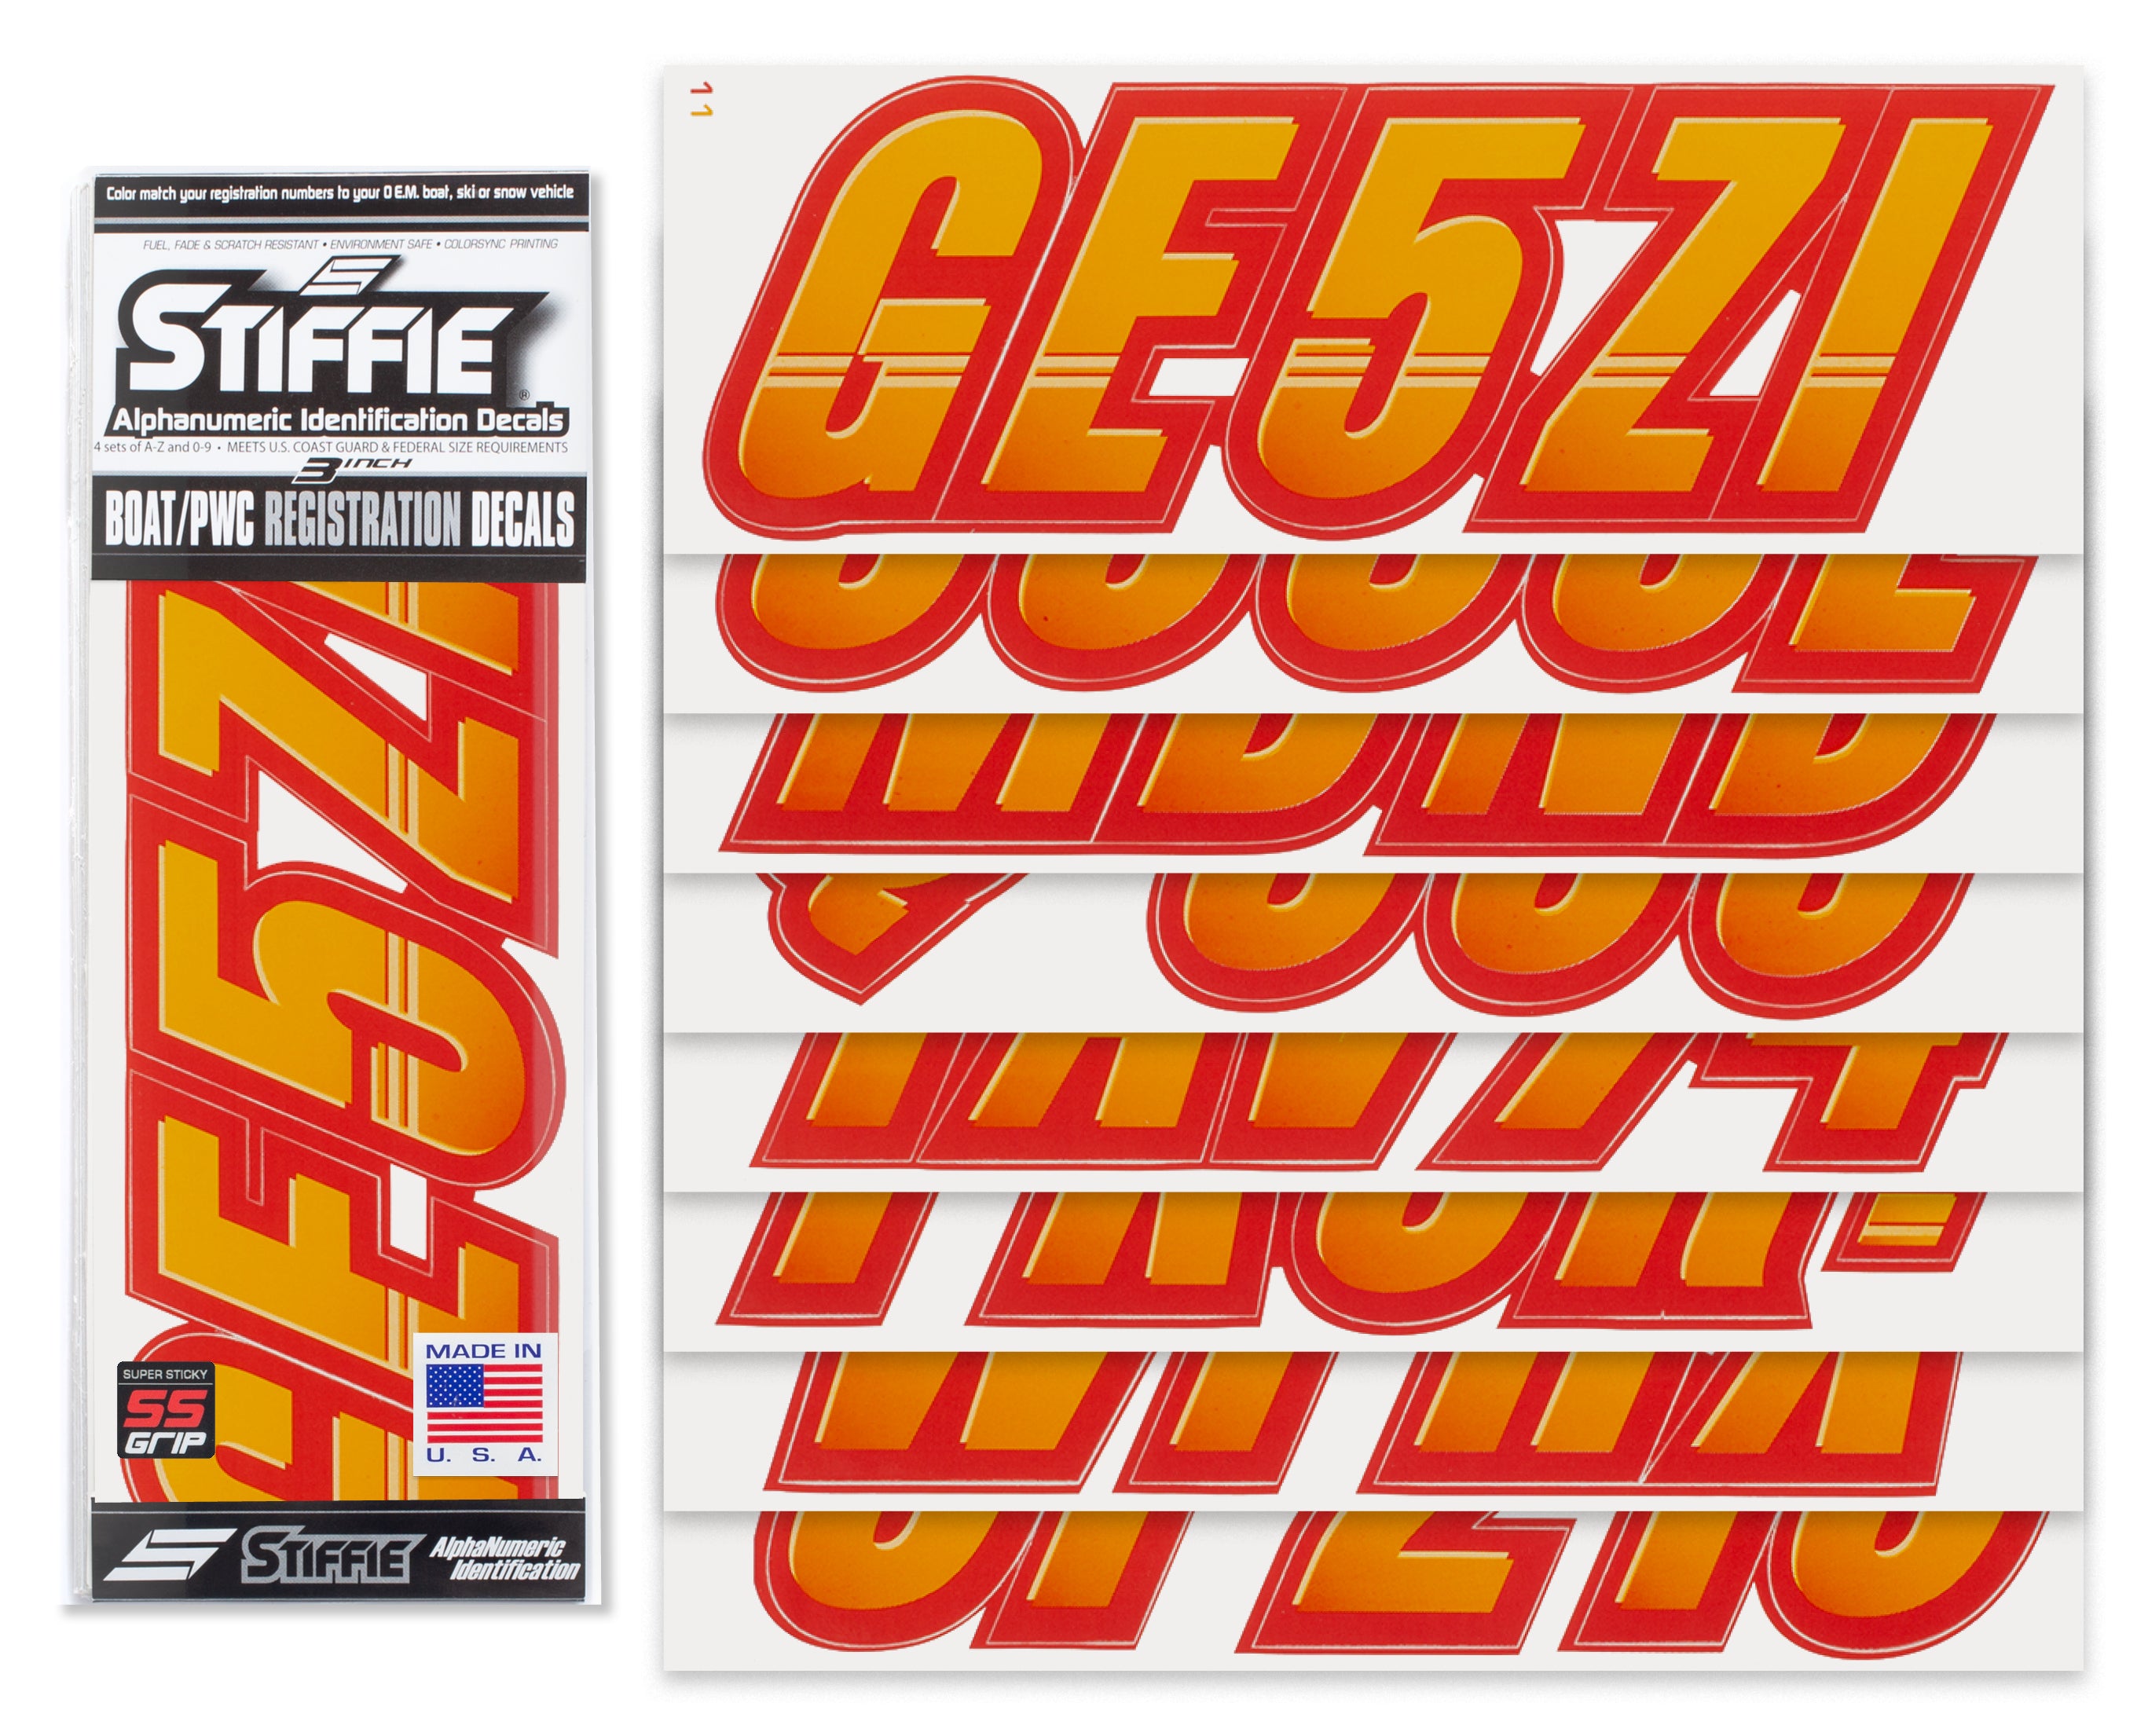 Stiffie Techtron Orange Crush/Red Super Sticky 3" Alpha Numeric Registration Identification Numbers Stickers Decals for Sea-Doo Spark, Inflatable Boats, Ribs, Hypalon/PVC, PWC and Boats.